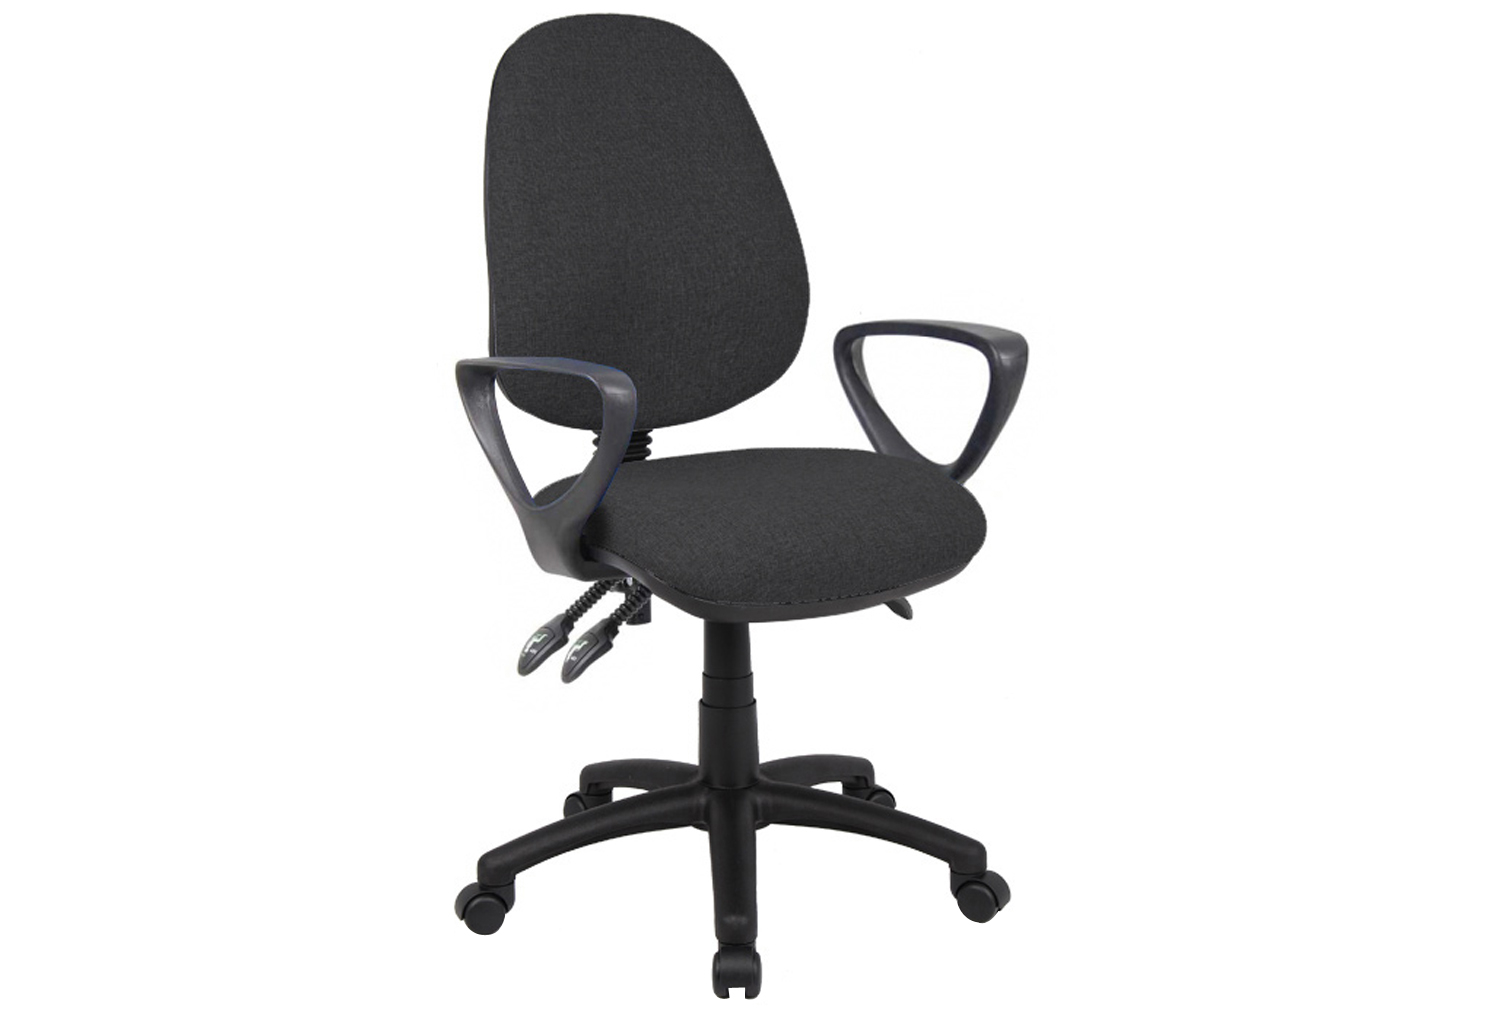 Full Lumbar 3 Lever Operator Office Chair With Fixed Arms, Black, Fully Installed